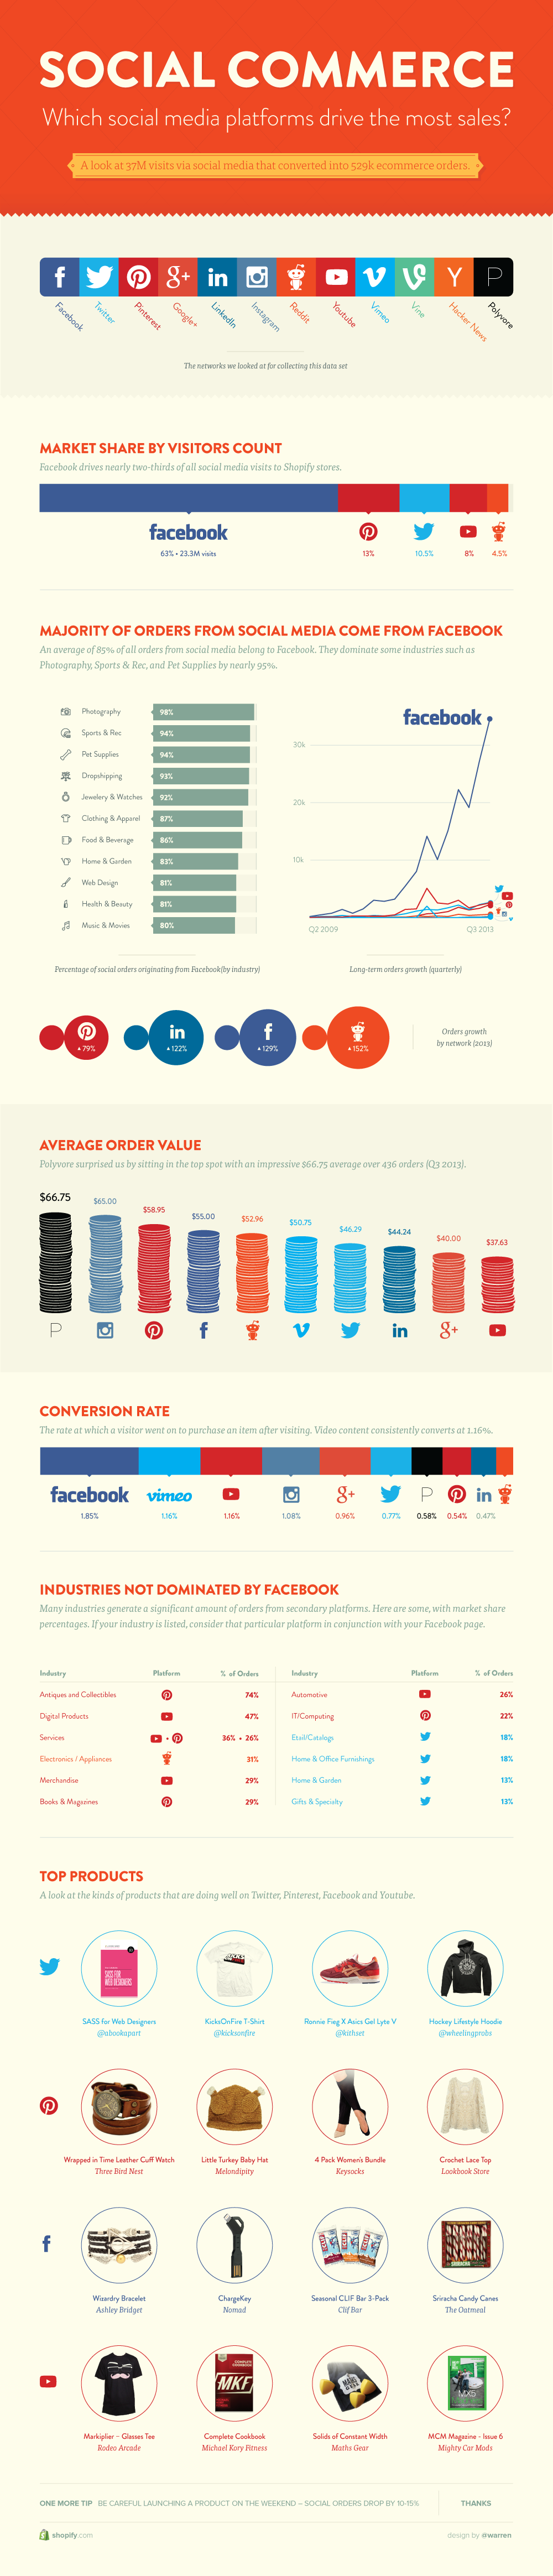 social-commerce-infographic